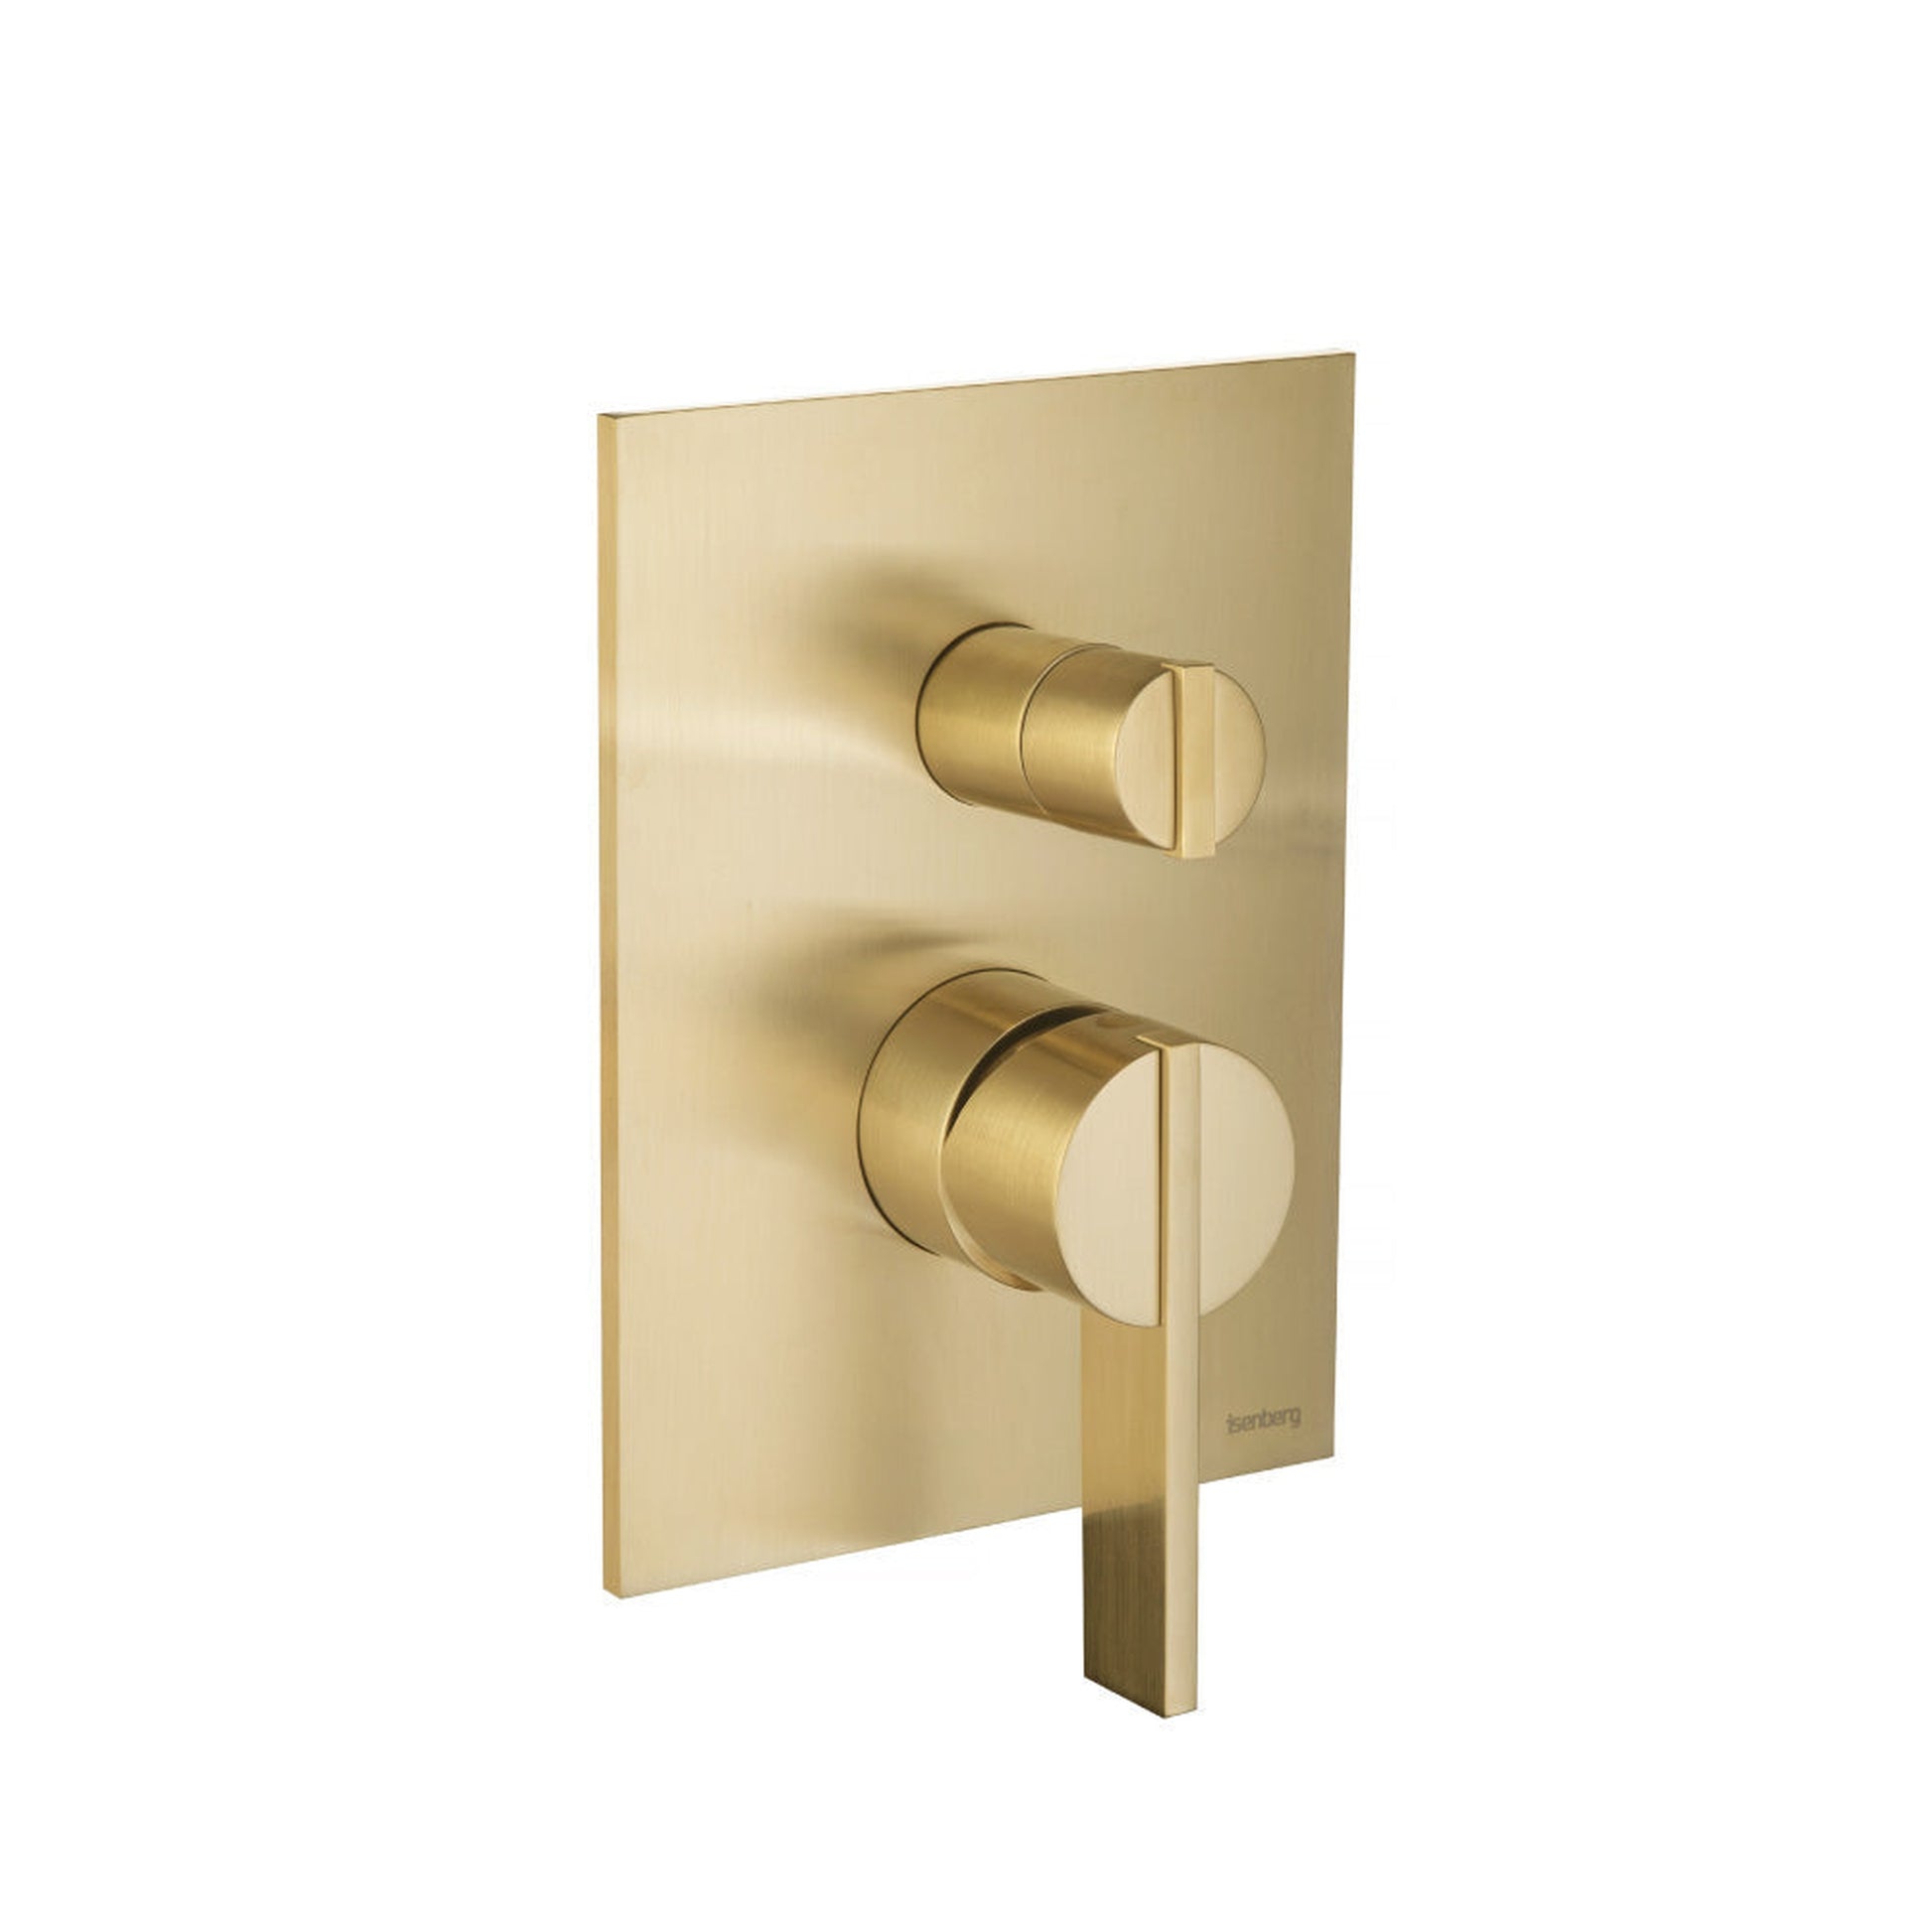 Isenberg Serie 145 Two Output Tub / Shower Trim With Pressure Balance Valve in Satin Brass